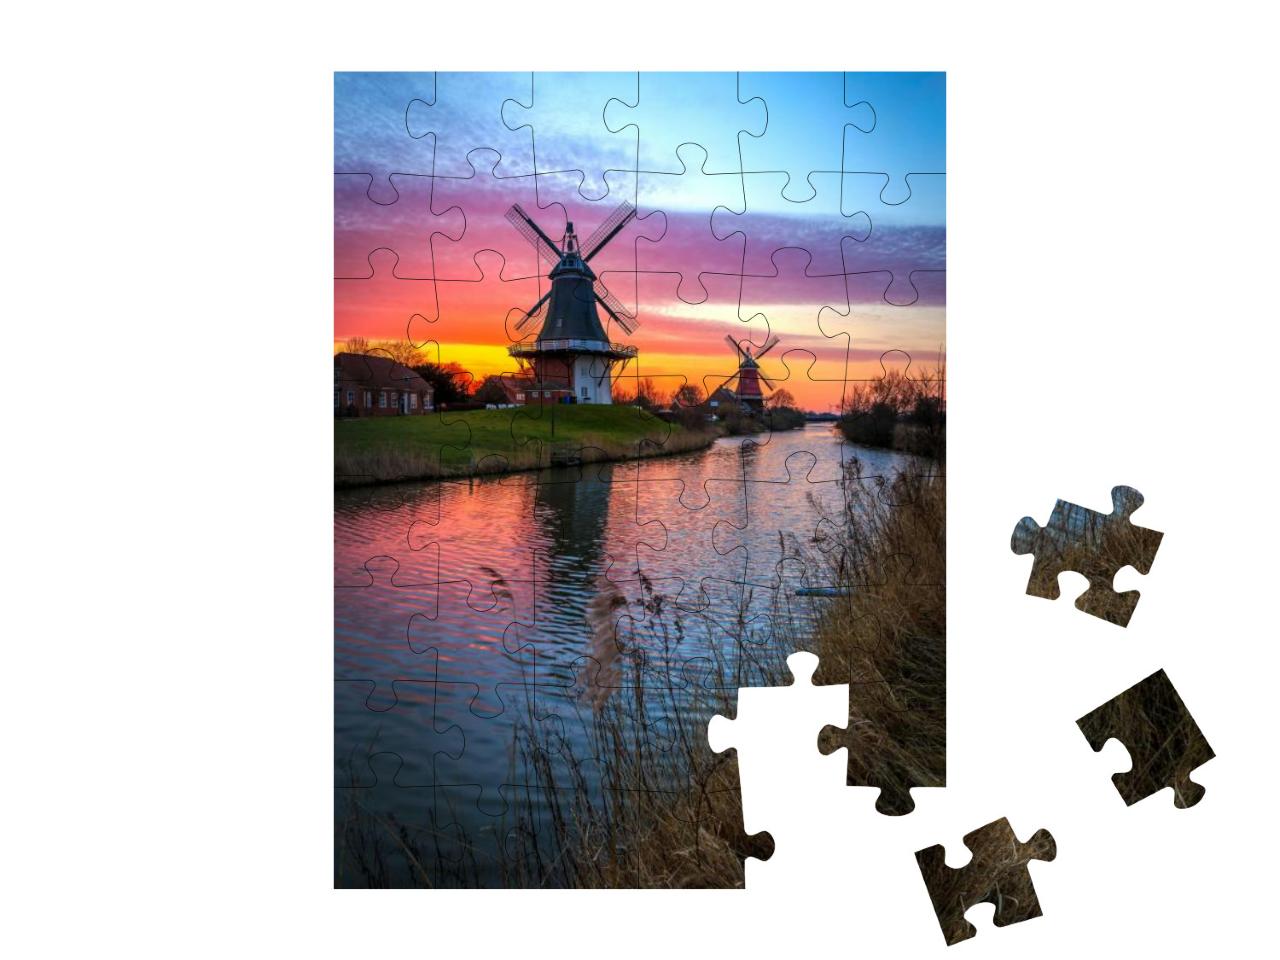 The Famous Twin Mills of Greetsiel, East Frisia At Sunris... Jigsaw Puzzle with 48 pieces